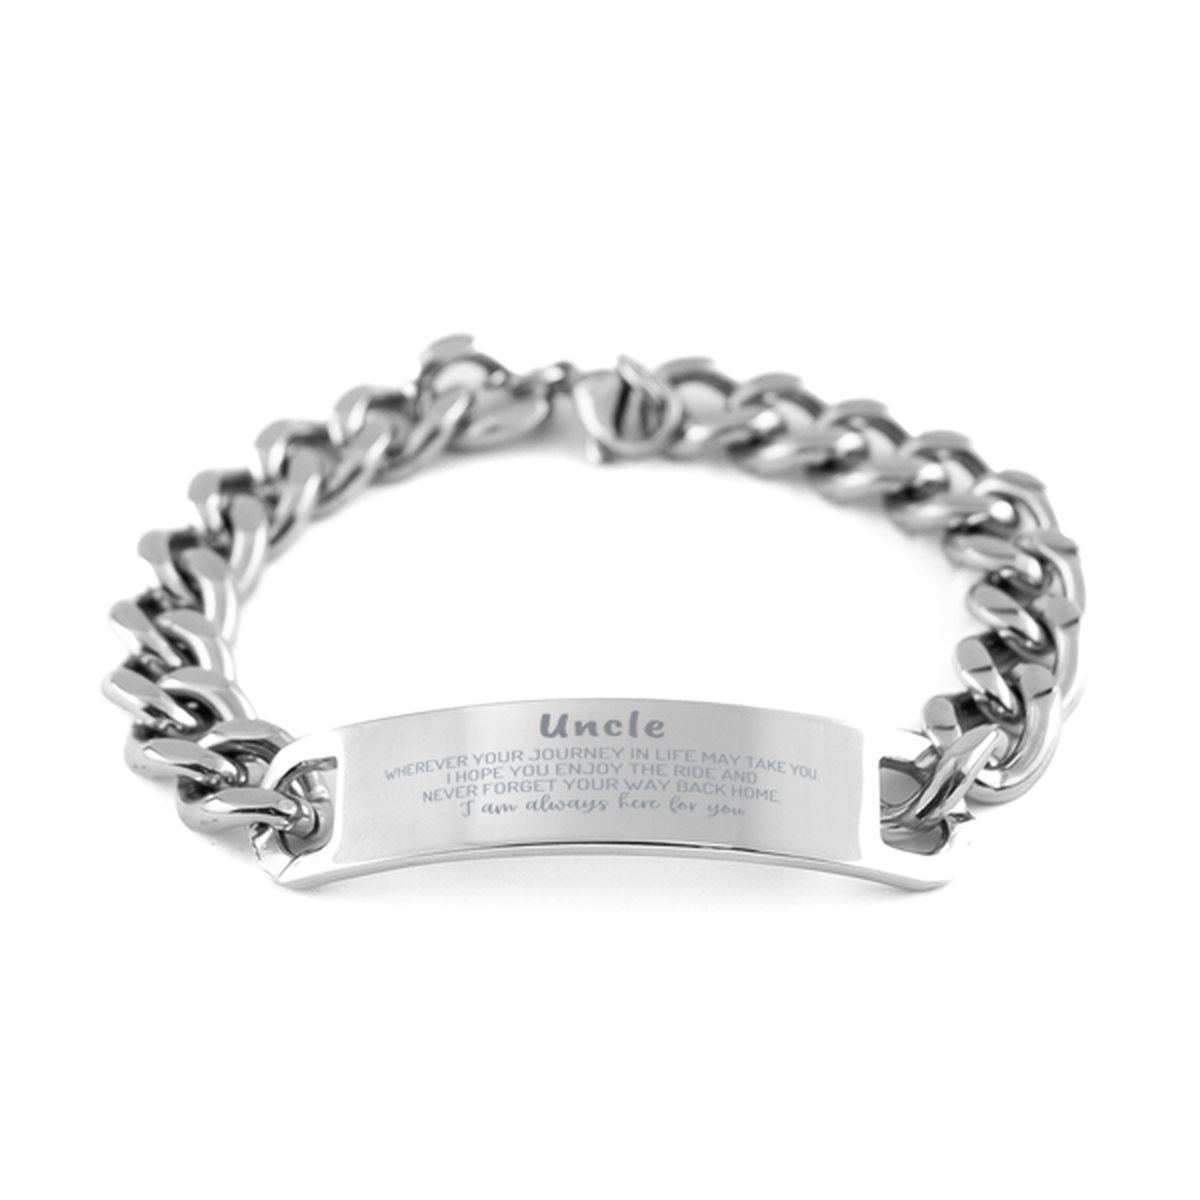 Uncle wherever your journey in life may take you, I am always here for you Uncle Cuban Chain Stainless Steel Bracelet, Awesome Christmas Gifts For Uncle, Uncle Birthday Gifts for Men Women Family Loved One